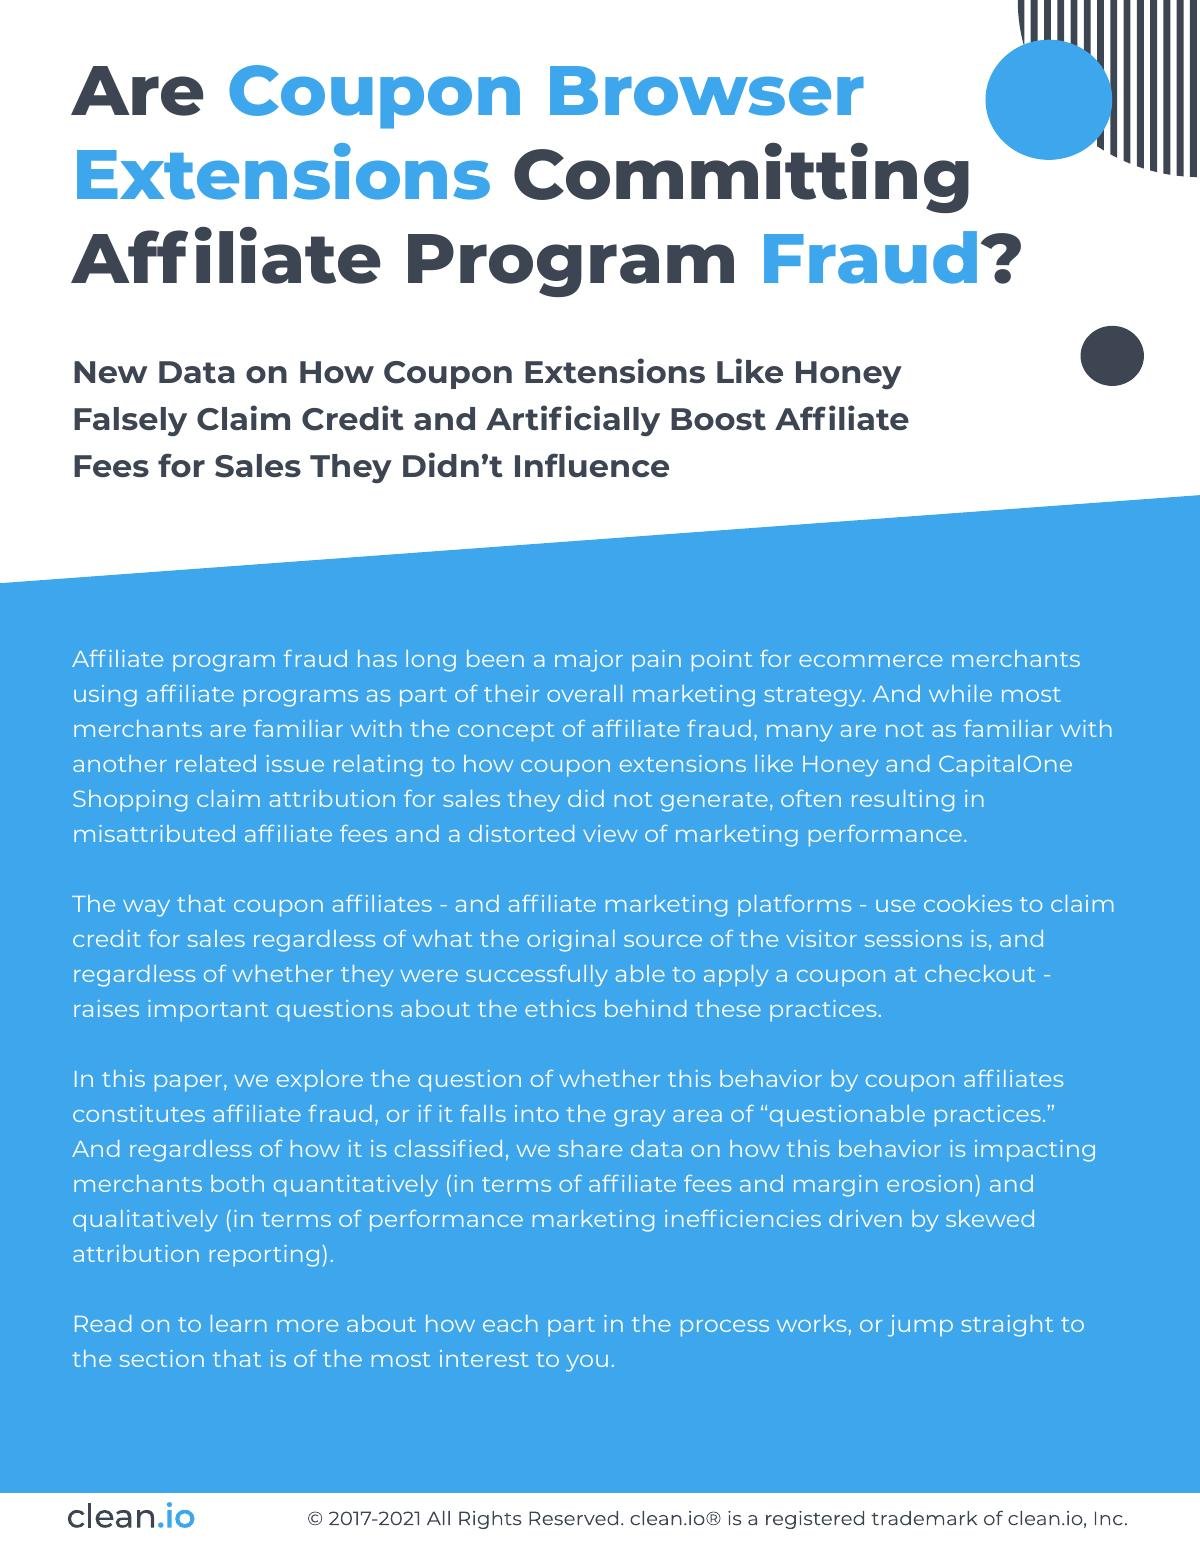 Are Coupon Browser Extensions Committing Affiliate Program Fraud?